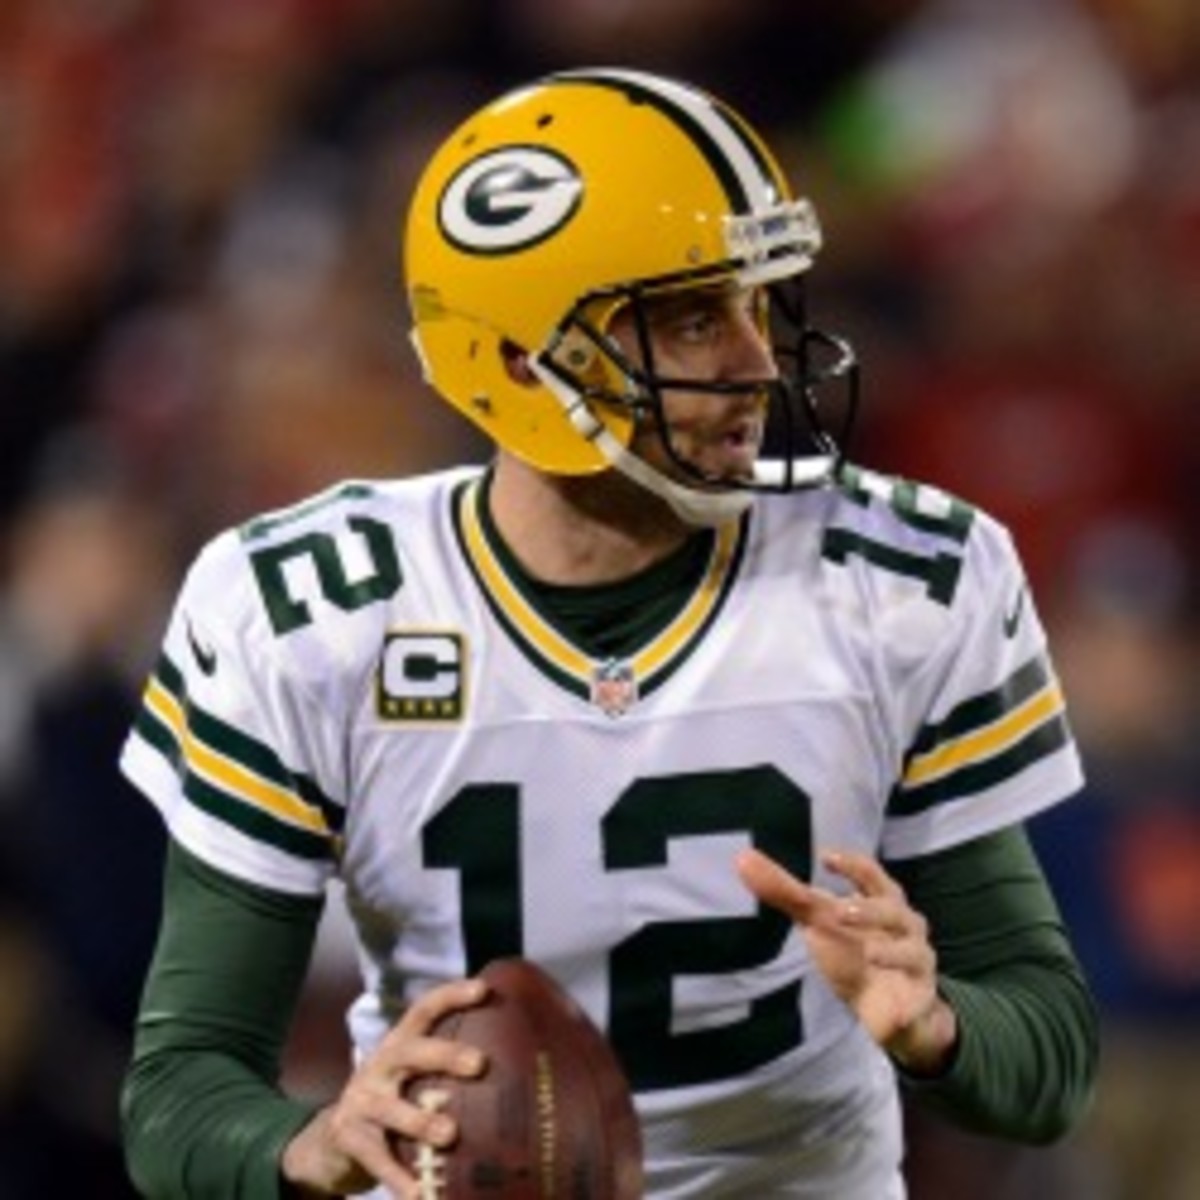 Packers quarterback Aaron Rodgers could be in for a big payday before his contract expires in 2014. (Thearon W. Henderson/Getty Images)